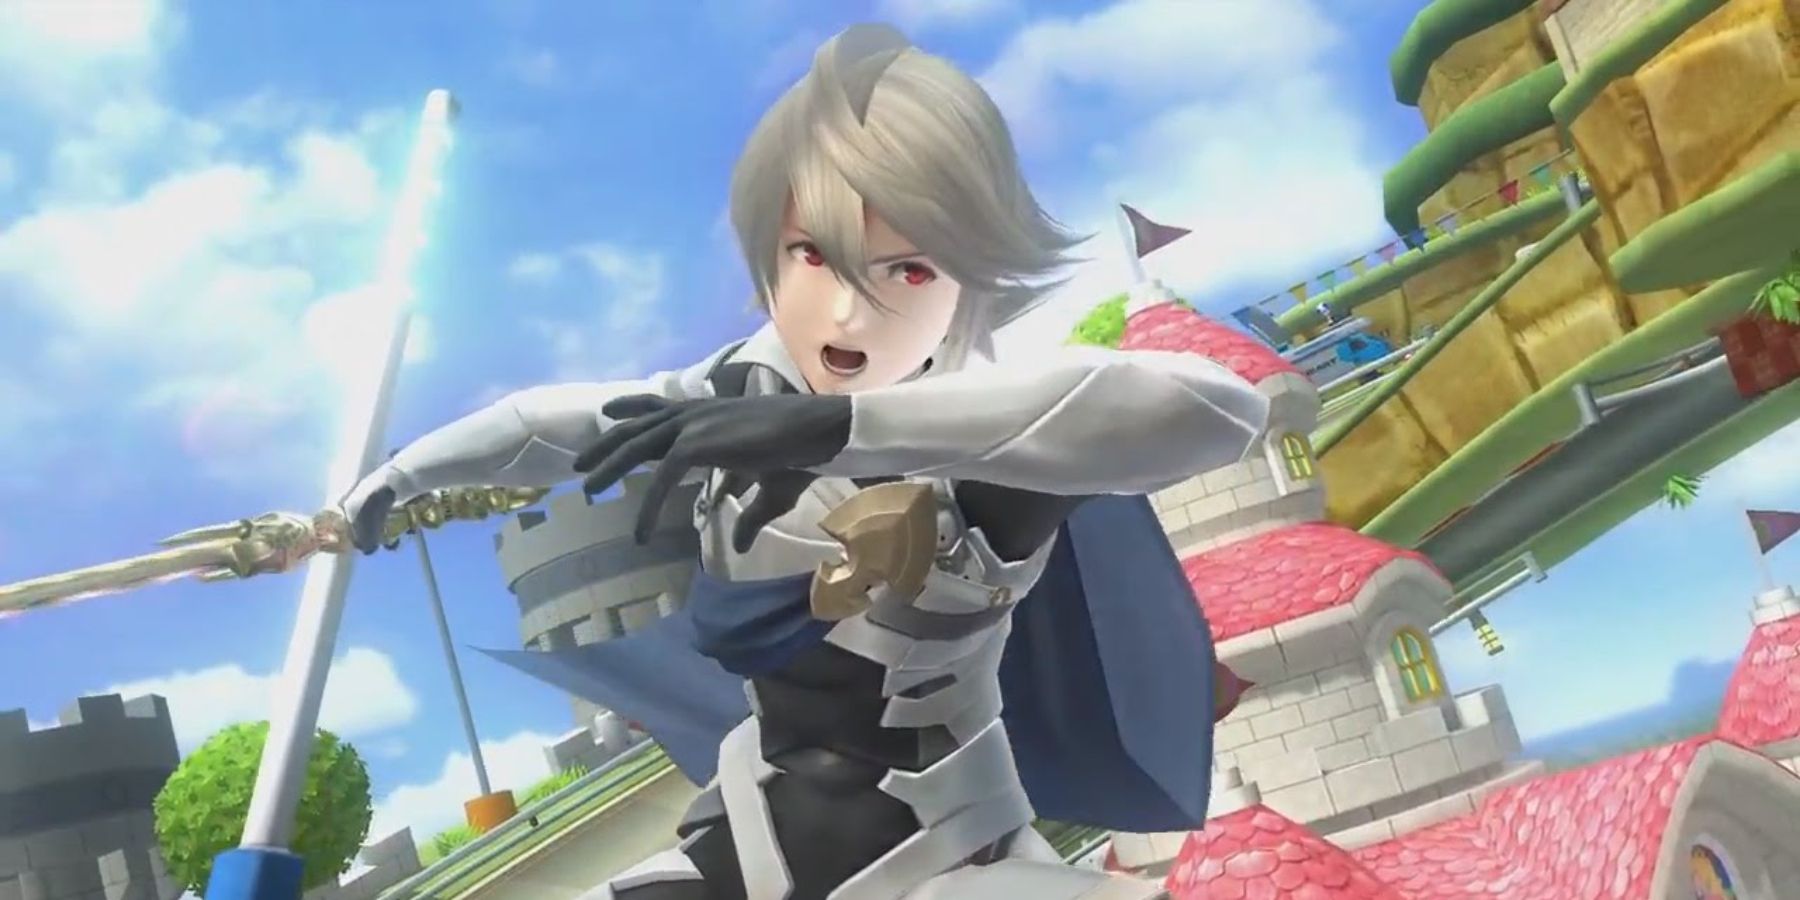 Corrin in the midst of battle